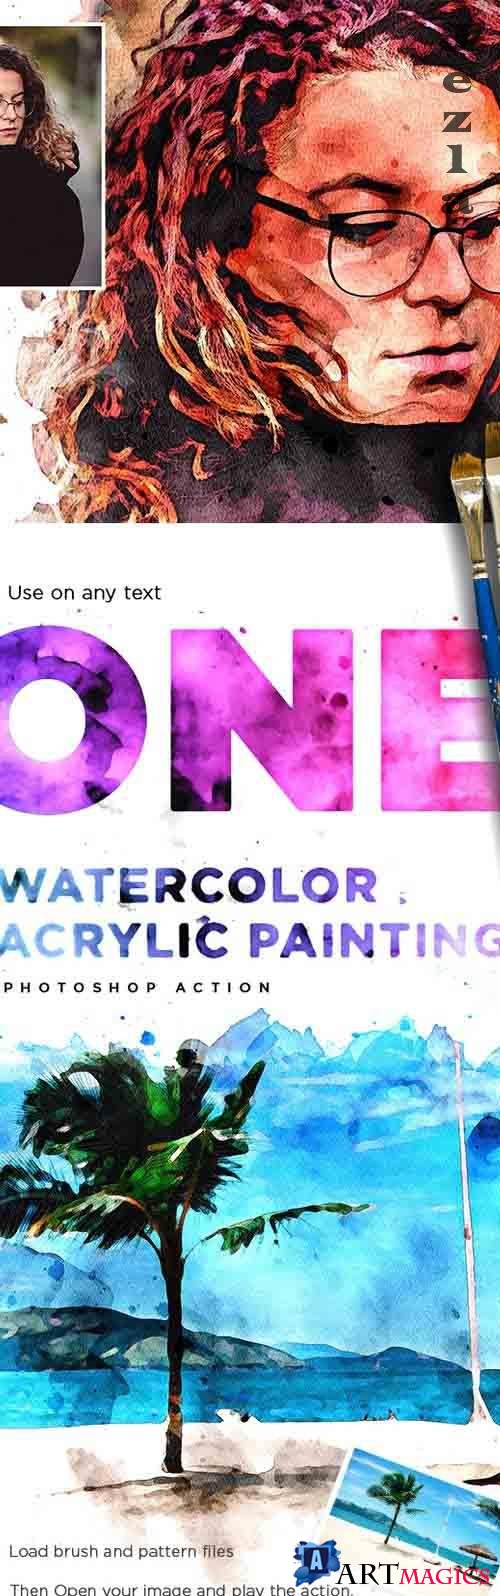 Watercolor Acrylic Painting - Photoshop Action - 26682376